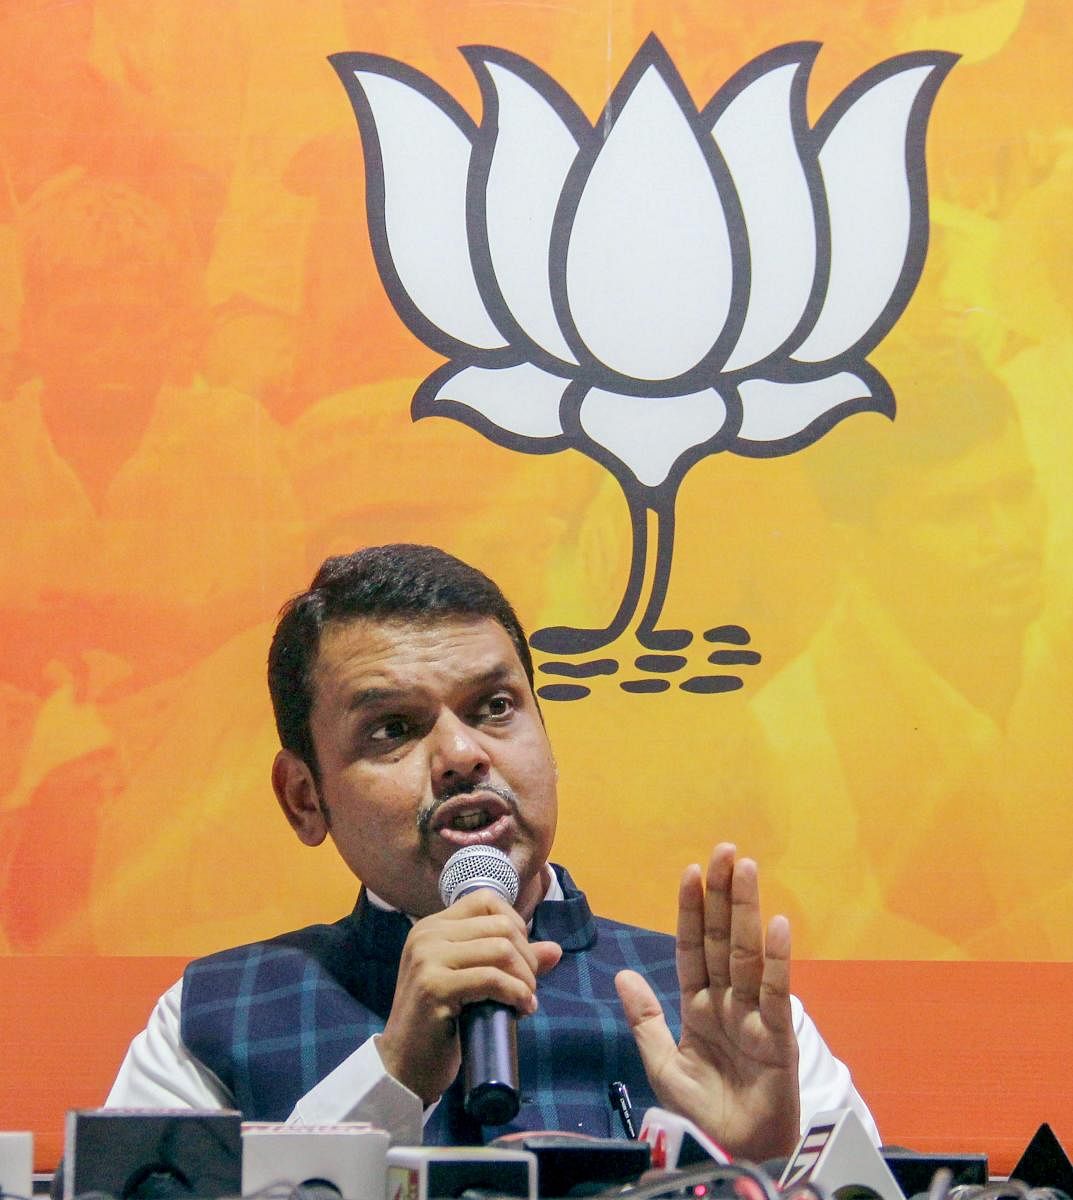 Fadnavis' Congress opponent Ashish Deshmukh termed the bungling in the name as "forgery" and accused the chief minister of "trying to hide something". Photo/PTI